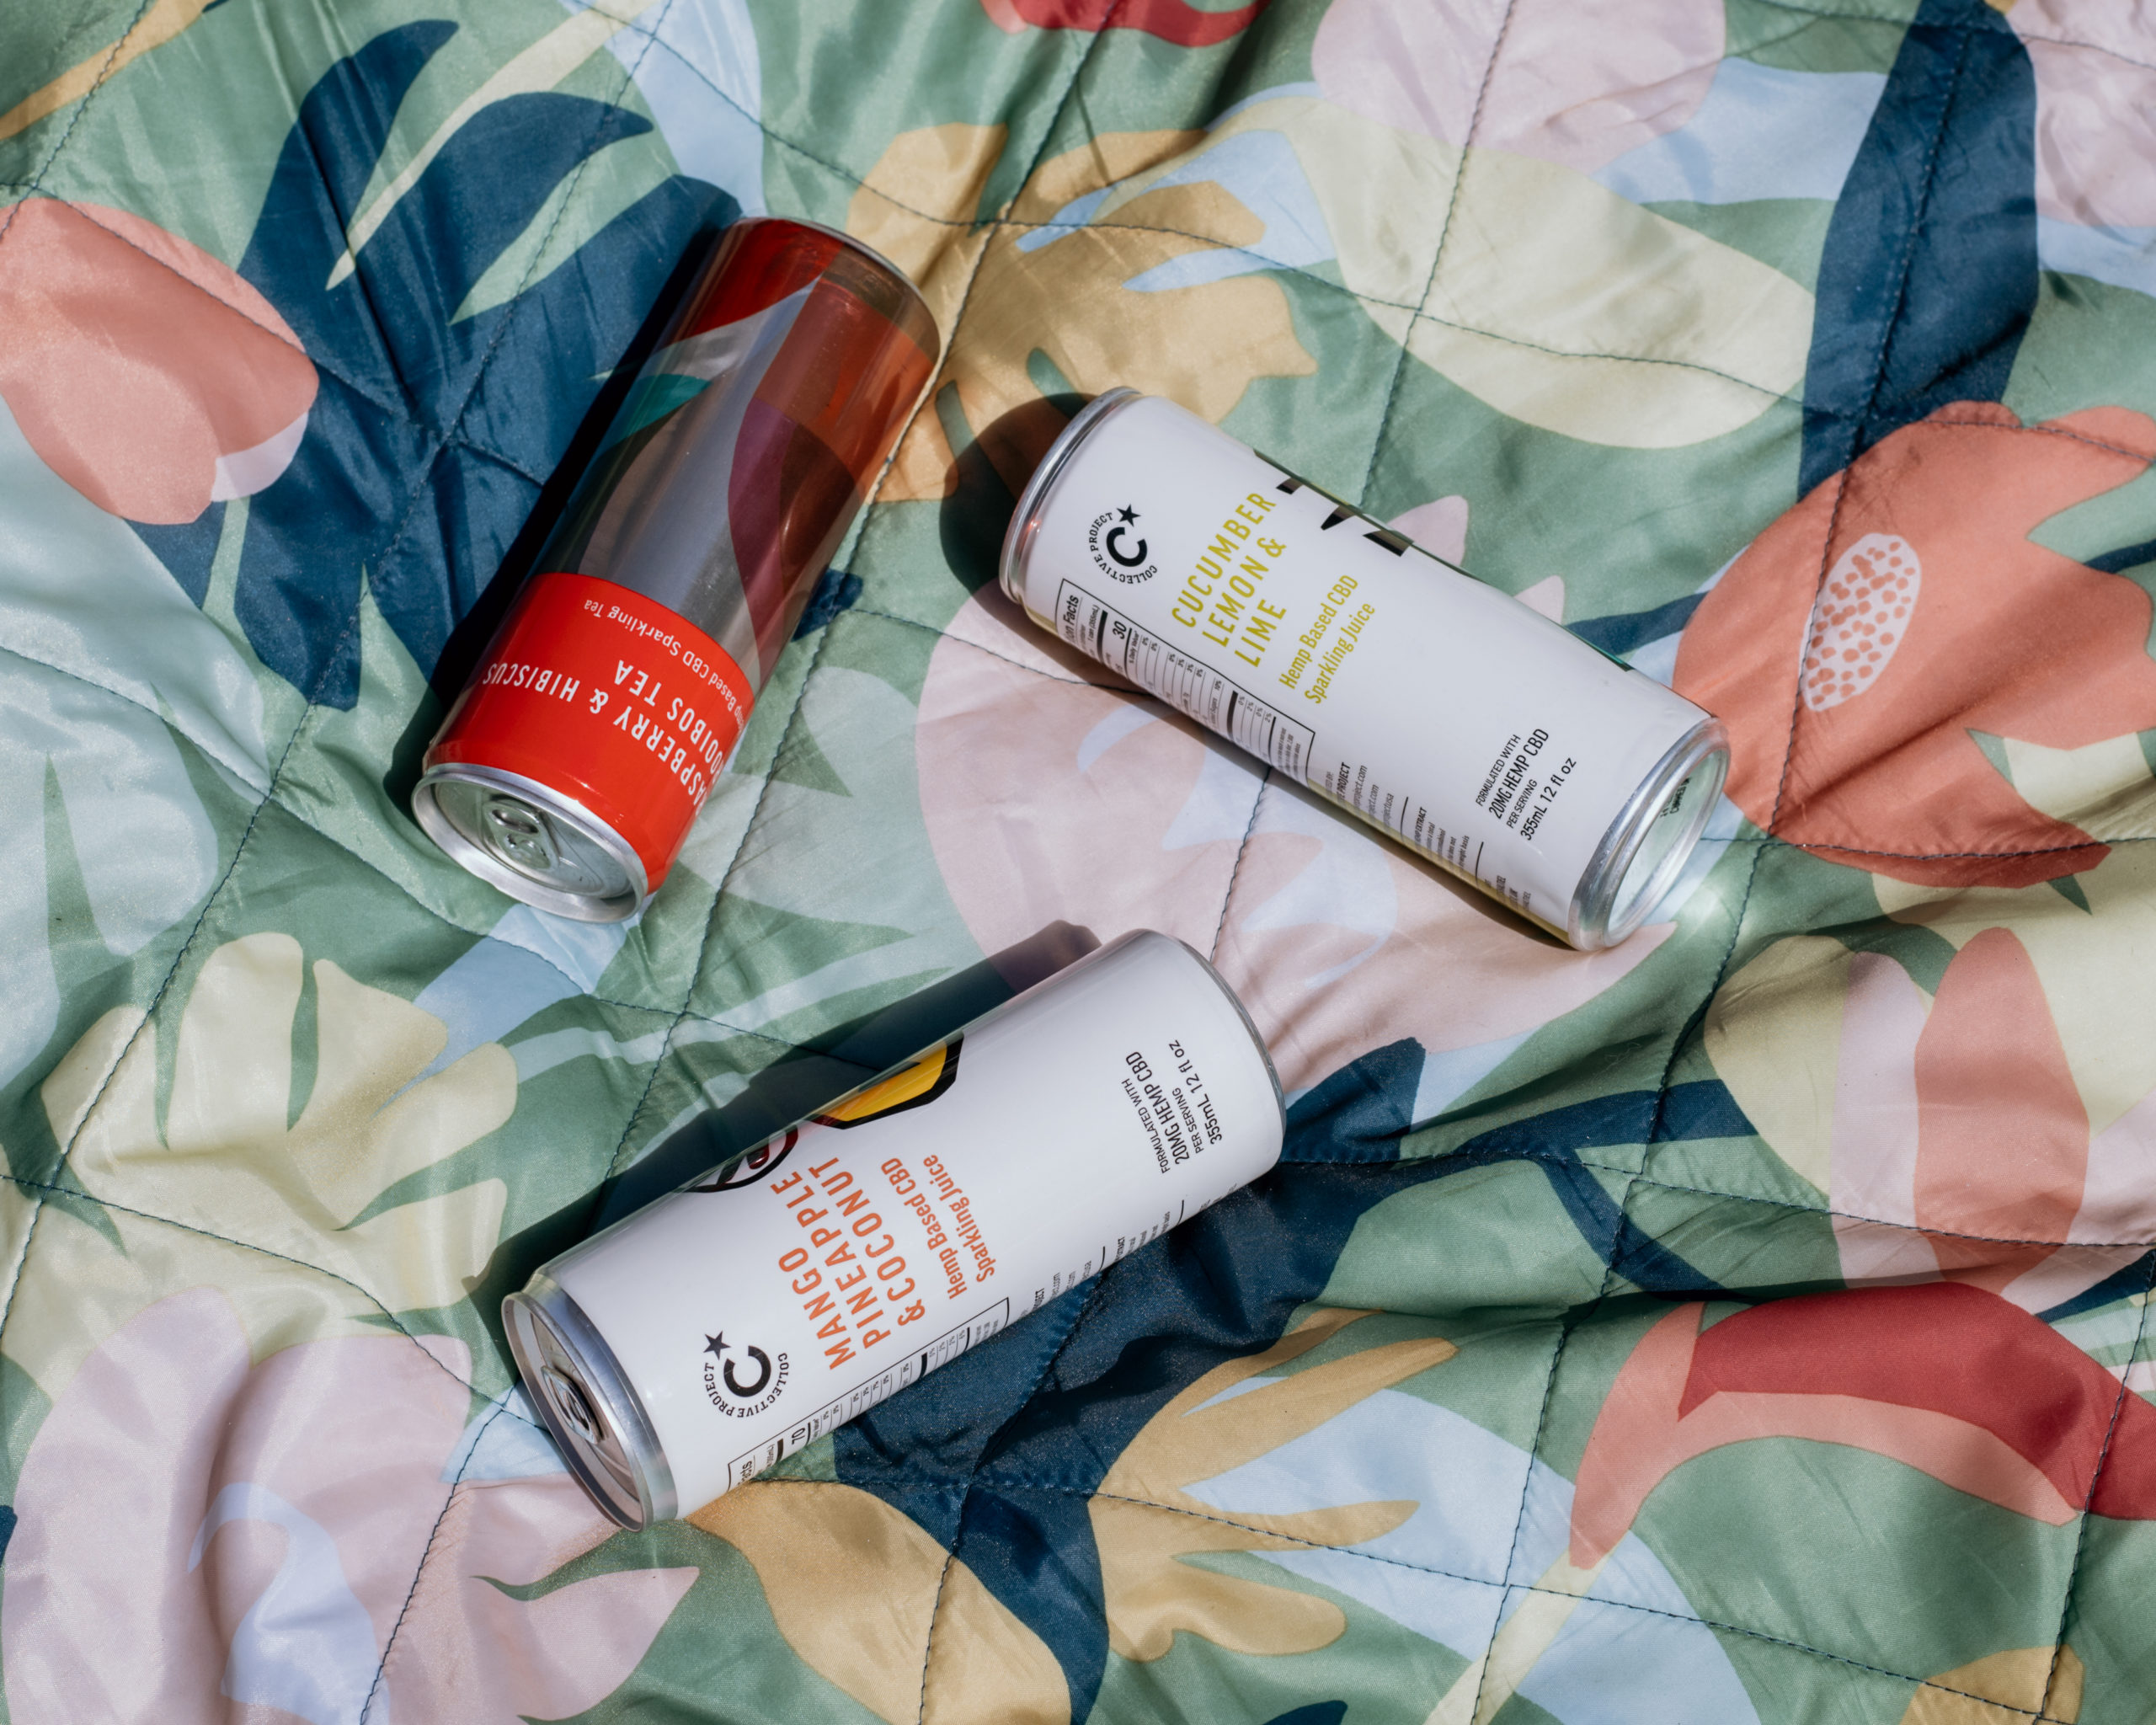 Collective Arts Launches CBD-Infused Sparkling Tea and Juice